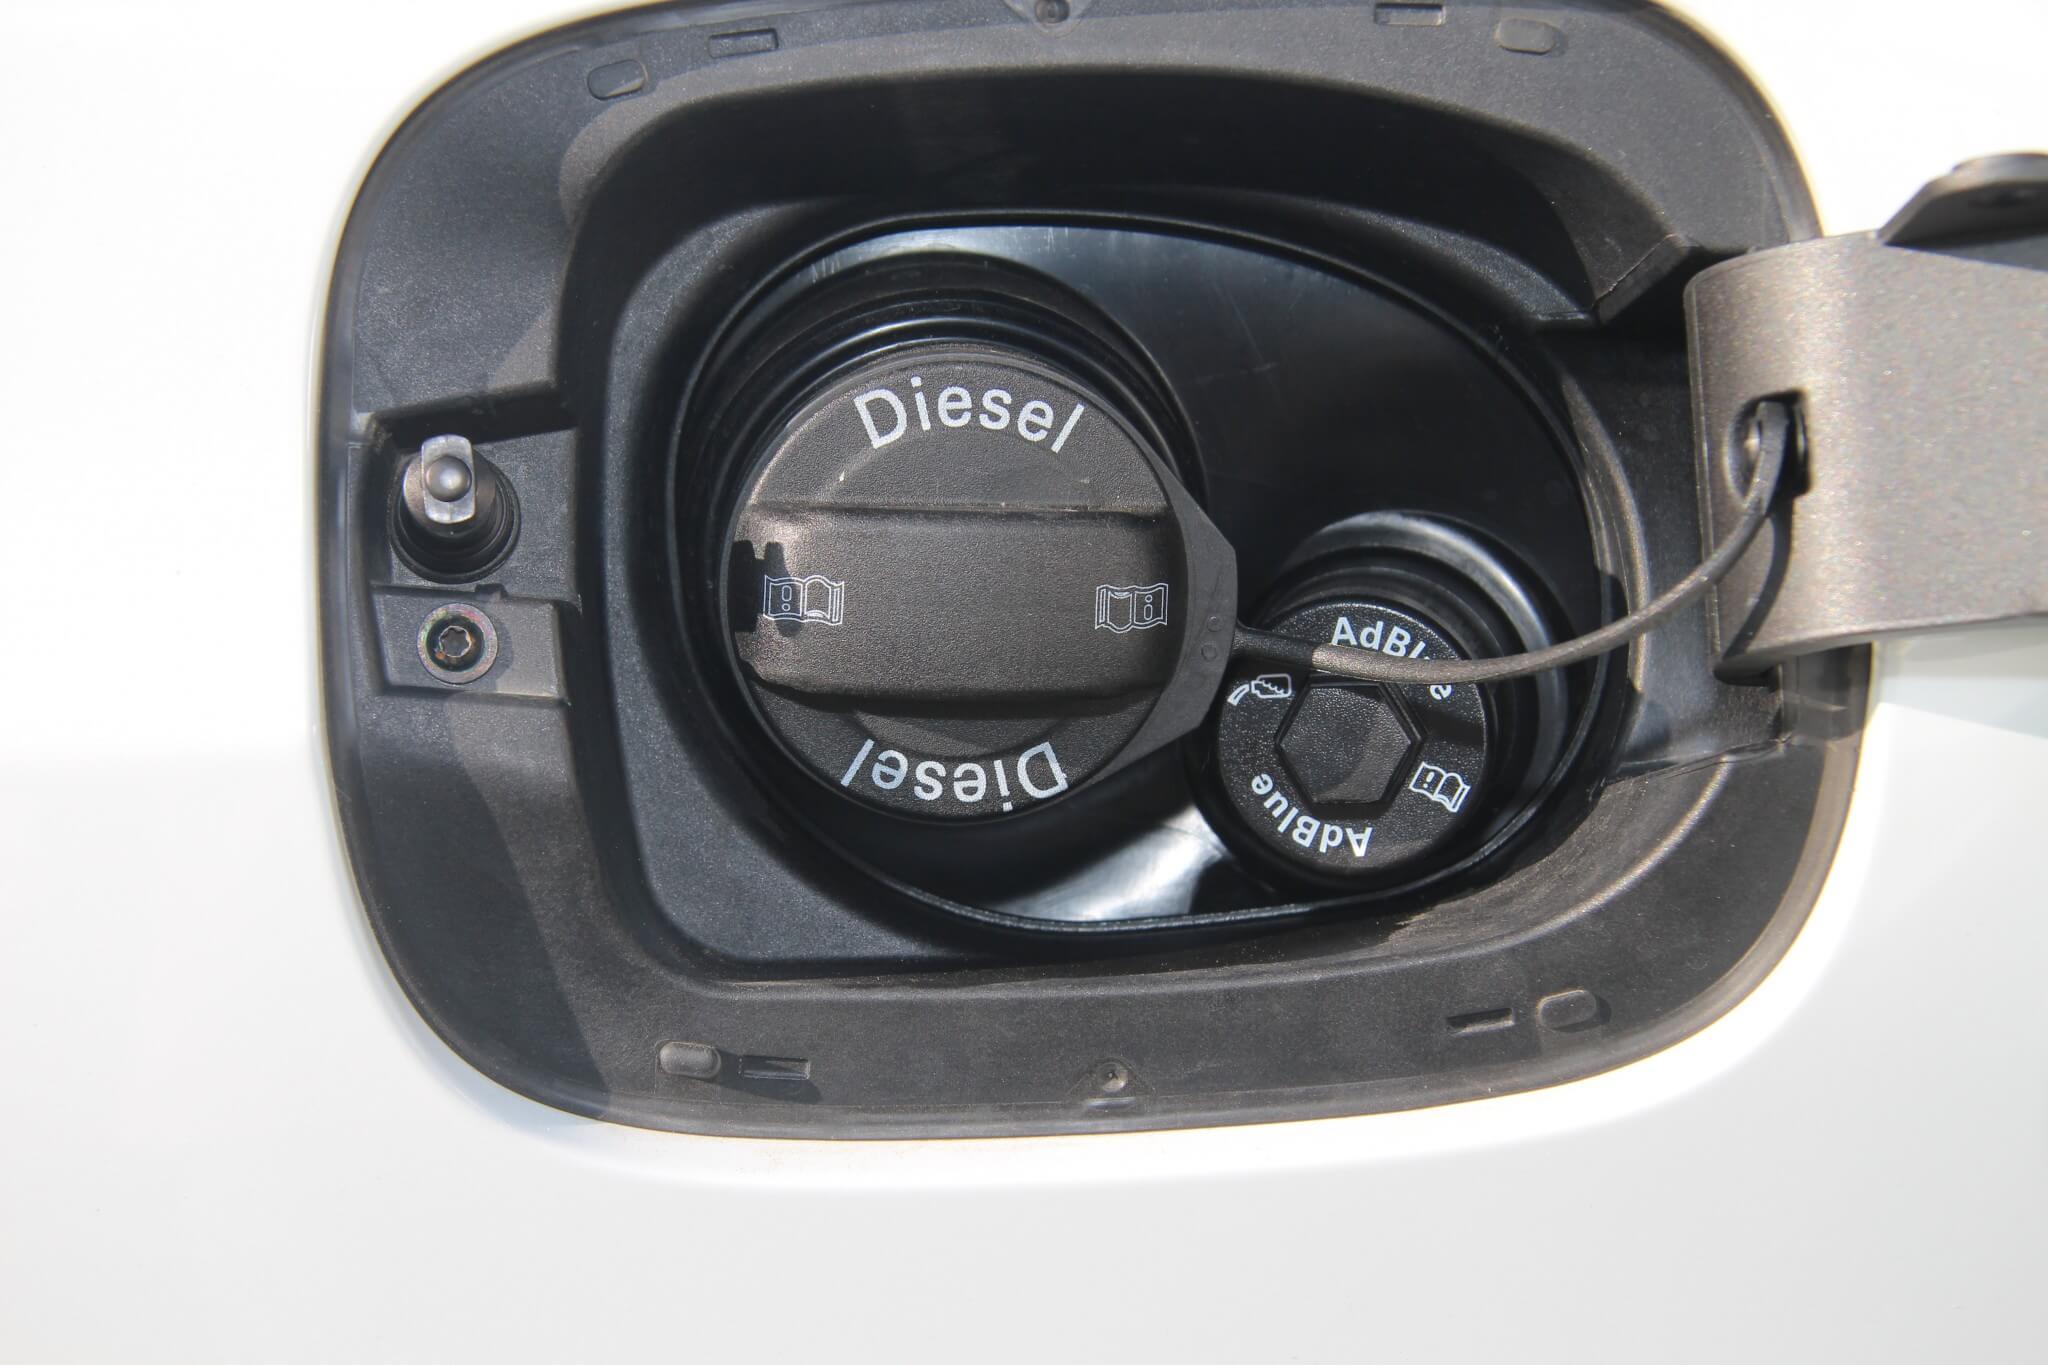 The 2014 Audi Q5 TDI has an AdBlue system. In other words, this rig requires DEF (A.K.A.) diesel exhaust fluid. By the 2015 model year, all new diesels sold in the USA will require DEF. 